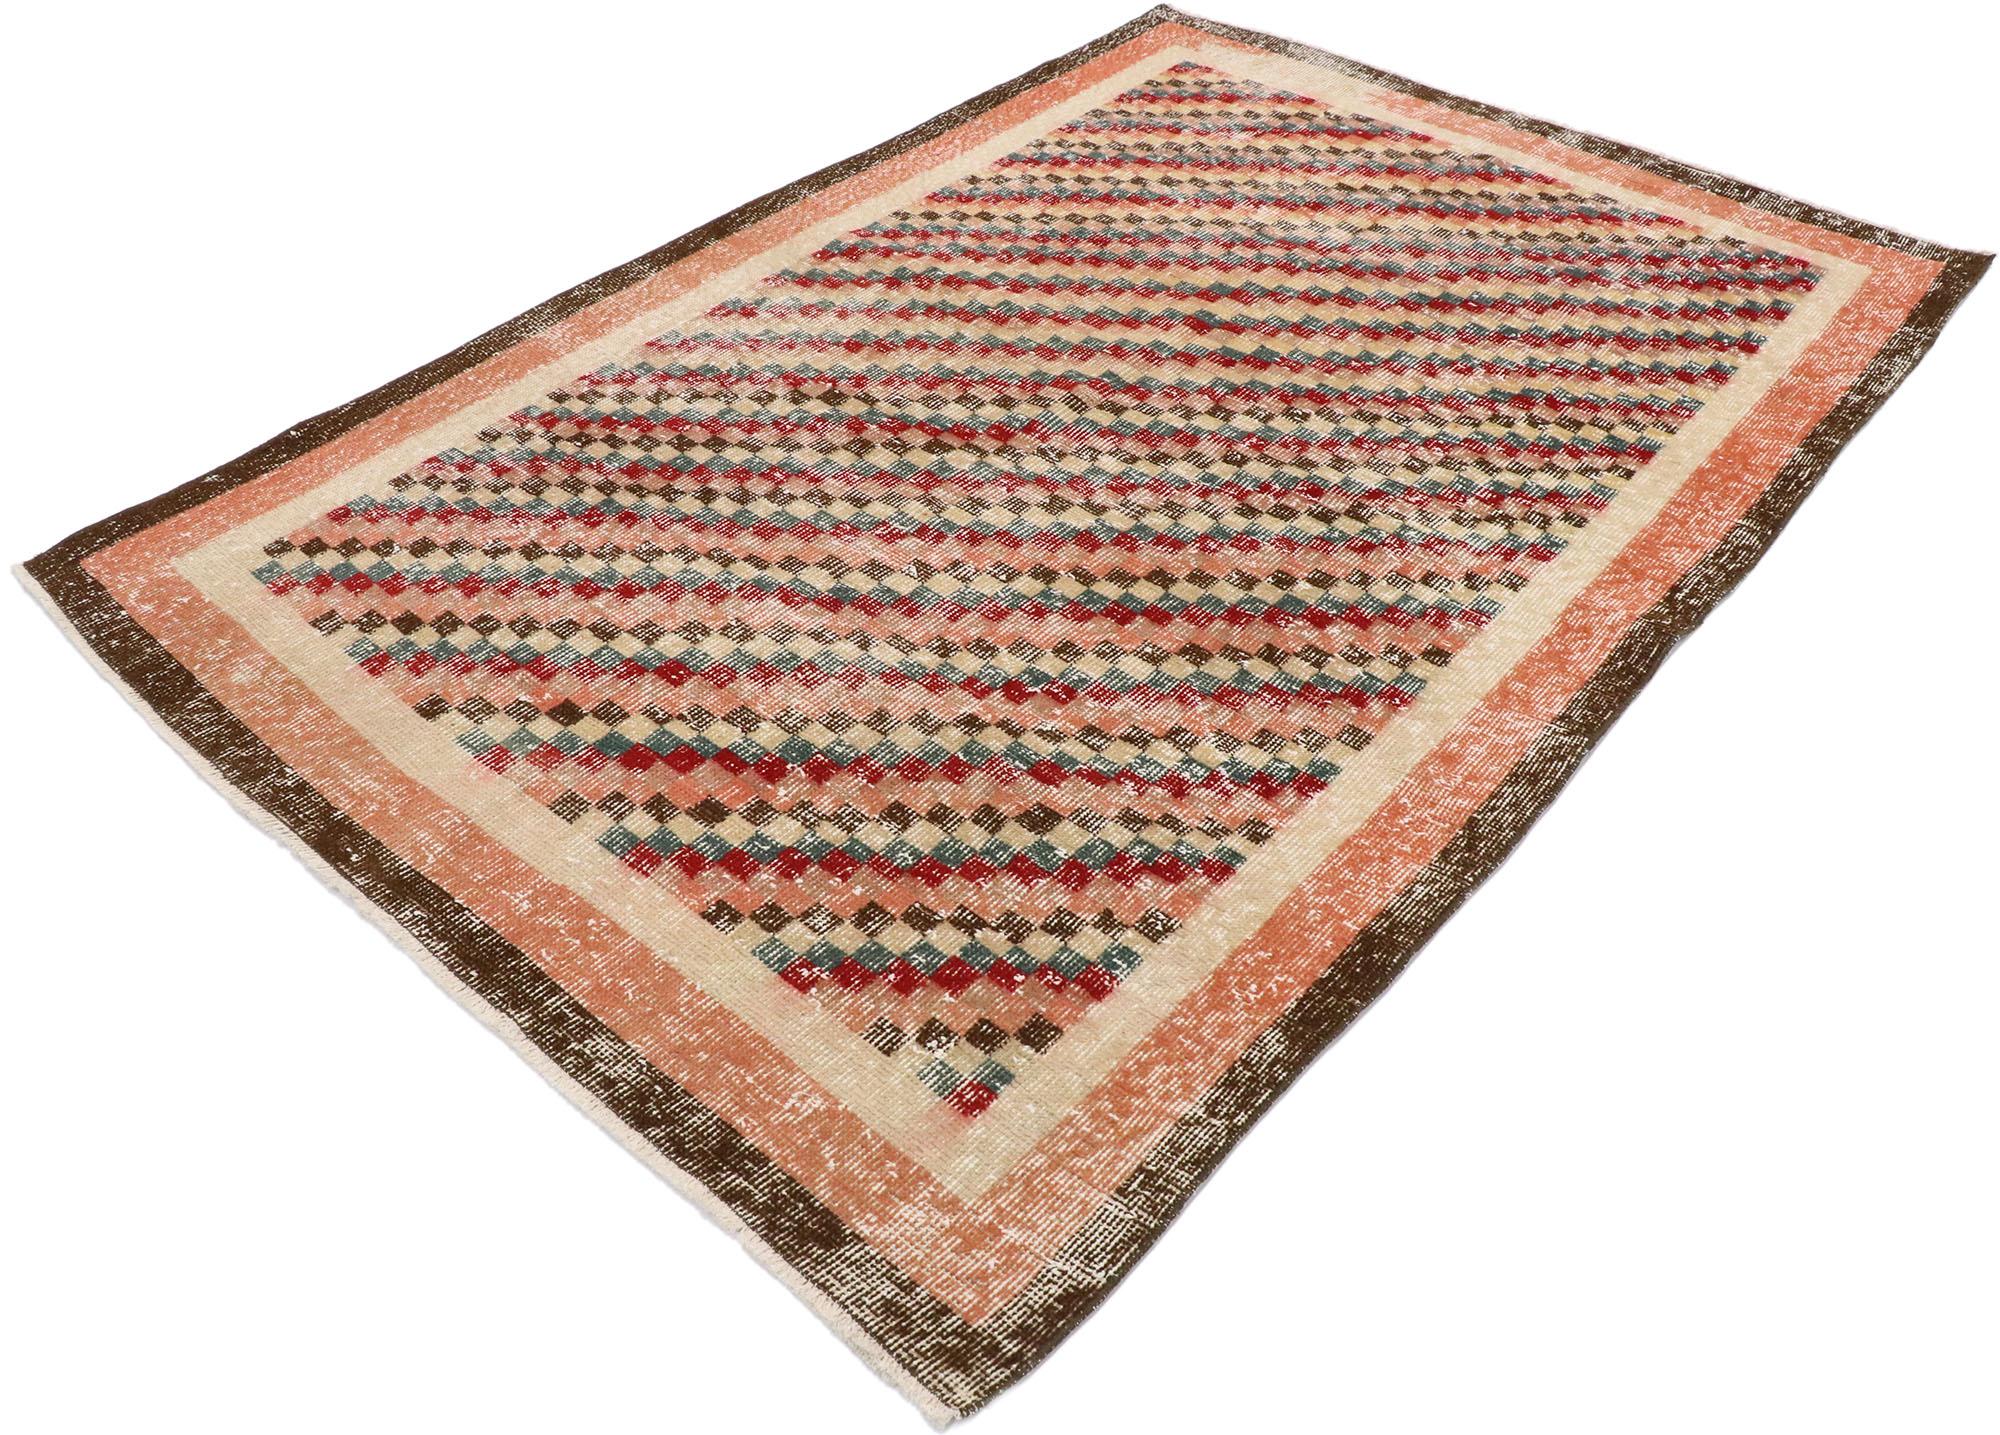 53366 Distressed Vintage Turkish Sivas Rug with Rustic Cubist style. This hand knotted wool distressed vintage Turkish Sivas rug features an all-over checkered diagonal stripe pattern comprised of rows of multicolored squares. Each row of small